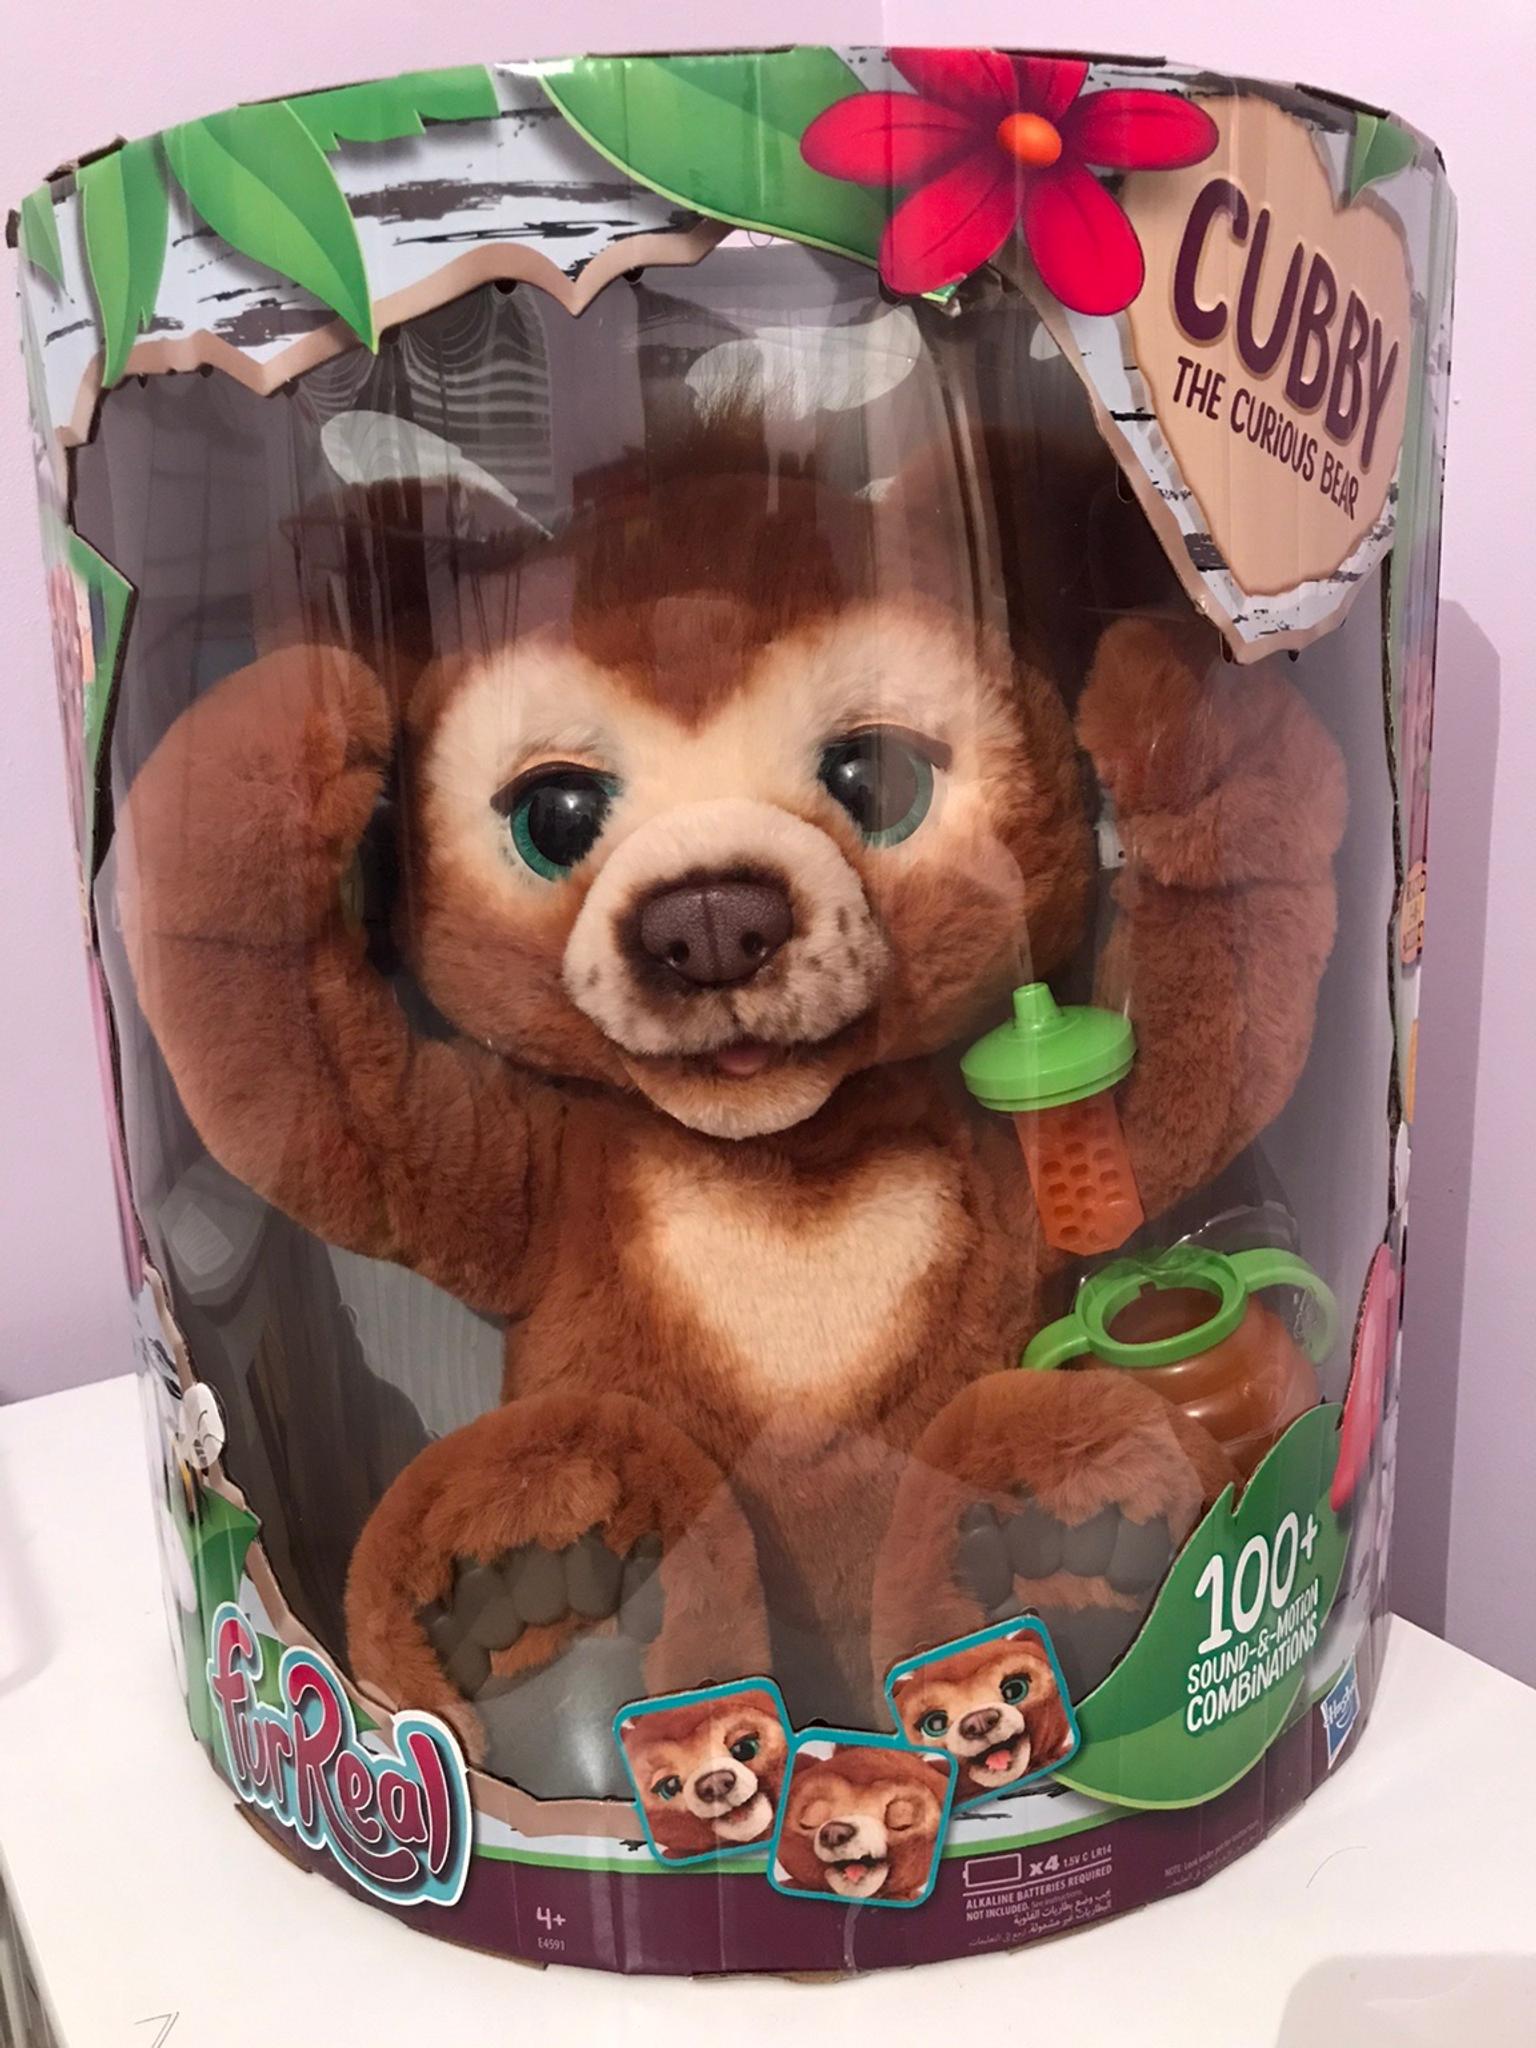 FurReal Friends Cubby the Curious Bear NEW